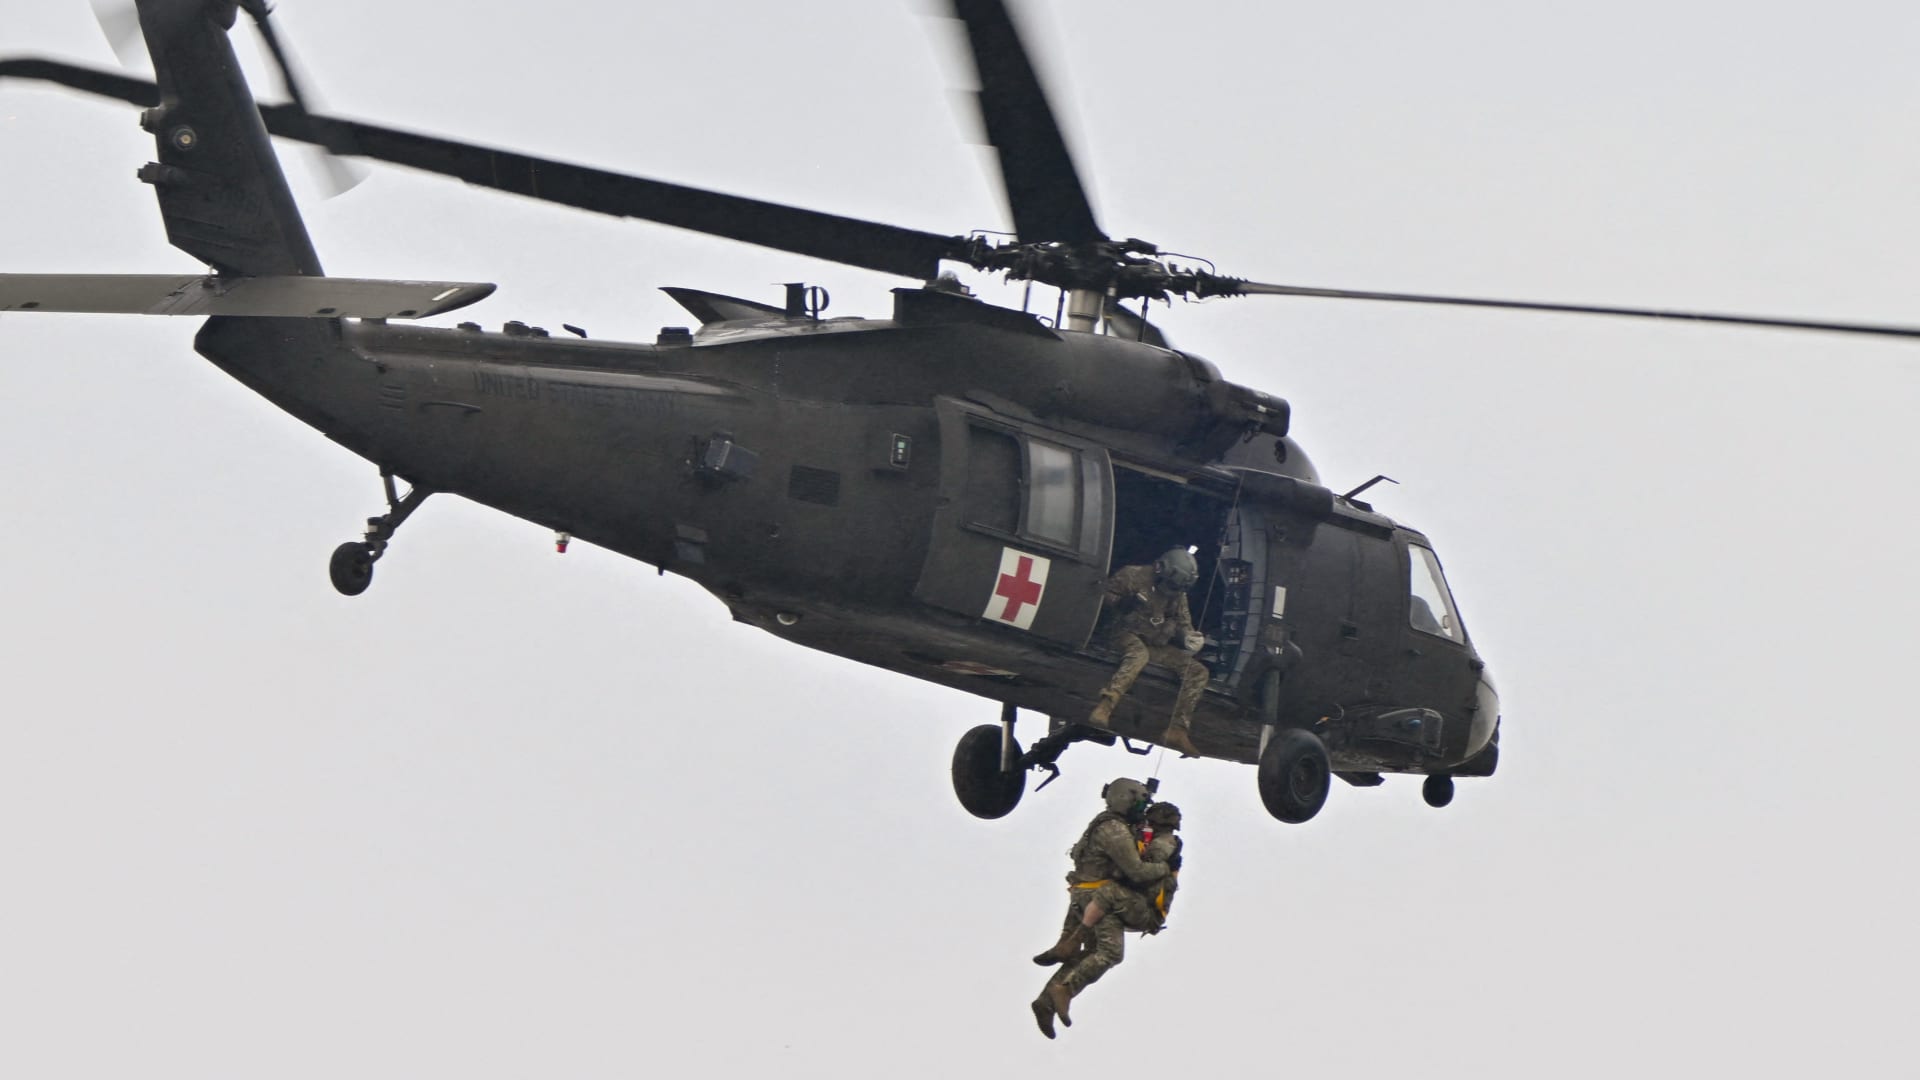 A medevac Black Hawk helicopter flies during a demonstration as part of the rotation of US troops of the US Army 101 Airborne division at Mihail Kogalniceanu Air Base (RoAF 57th Air Base) near Constanta, Romania on March 31, 2023. 